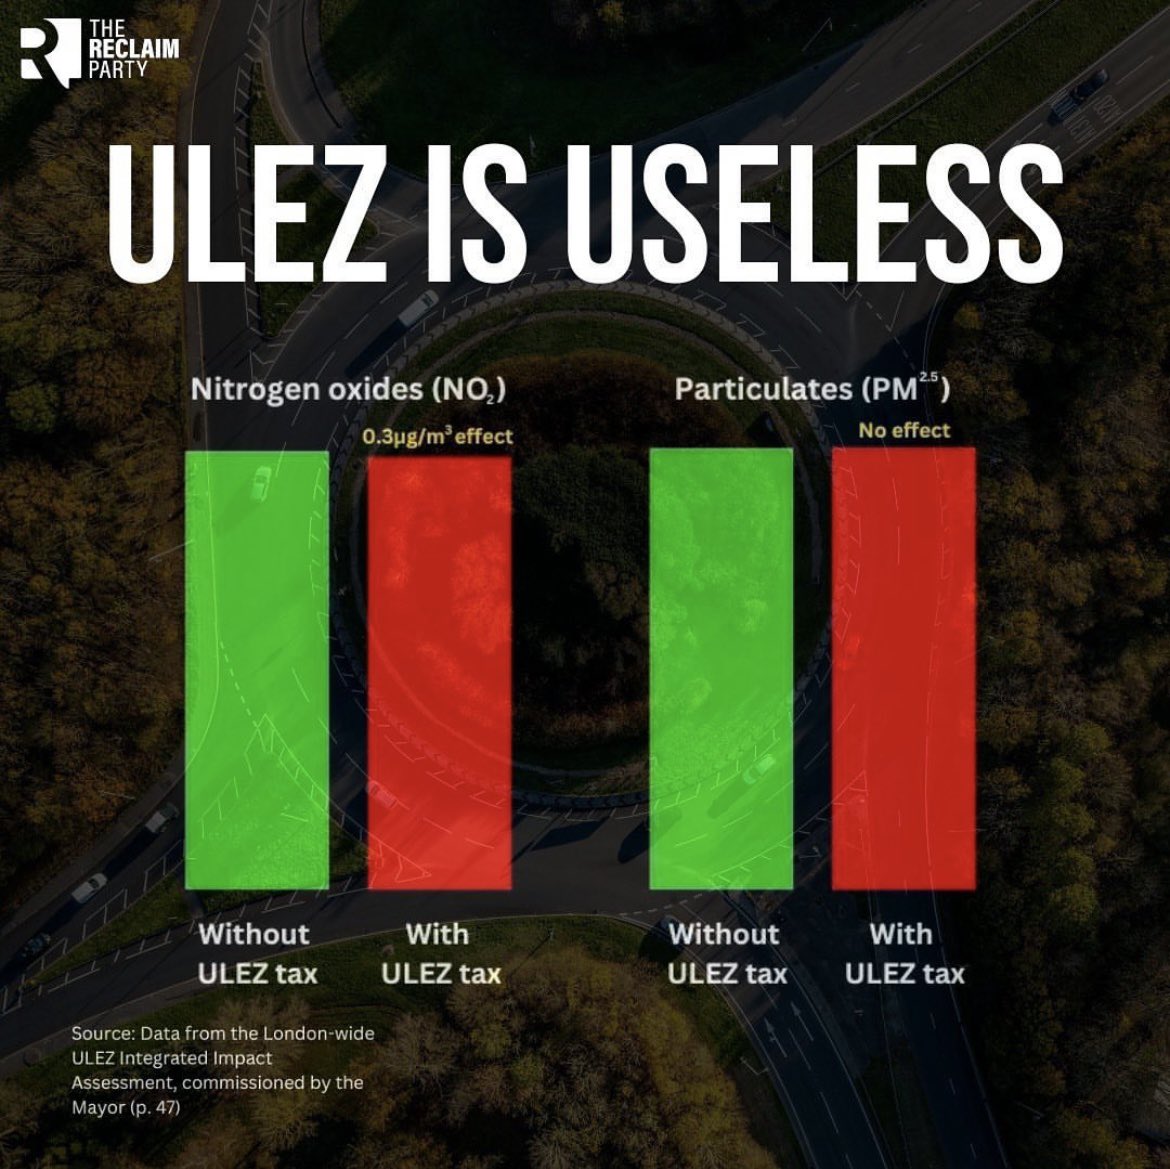 Has London voted for more taxes? Do you believe #Ulez is a good thing? Let us know in the comments below 👇 @LozzaFox | @SadiqKhan